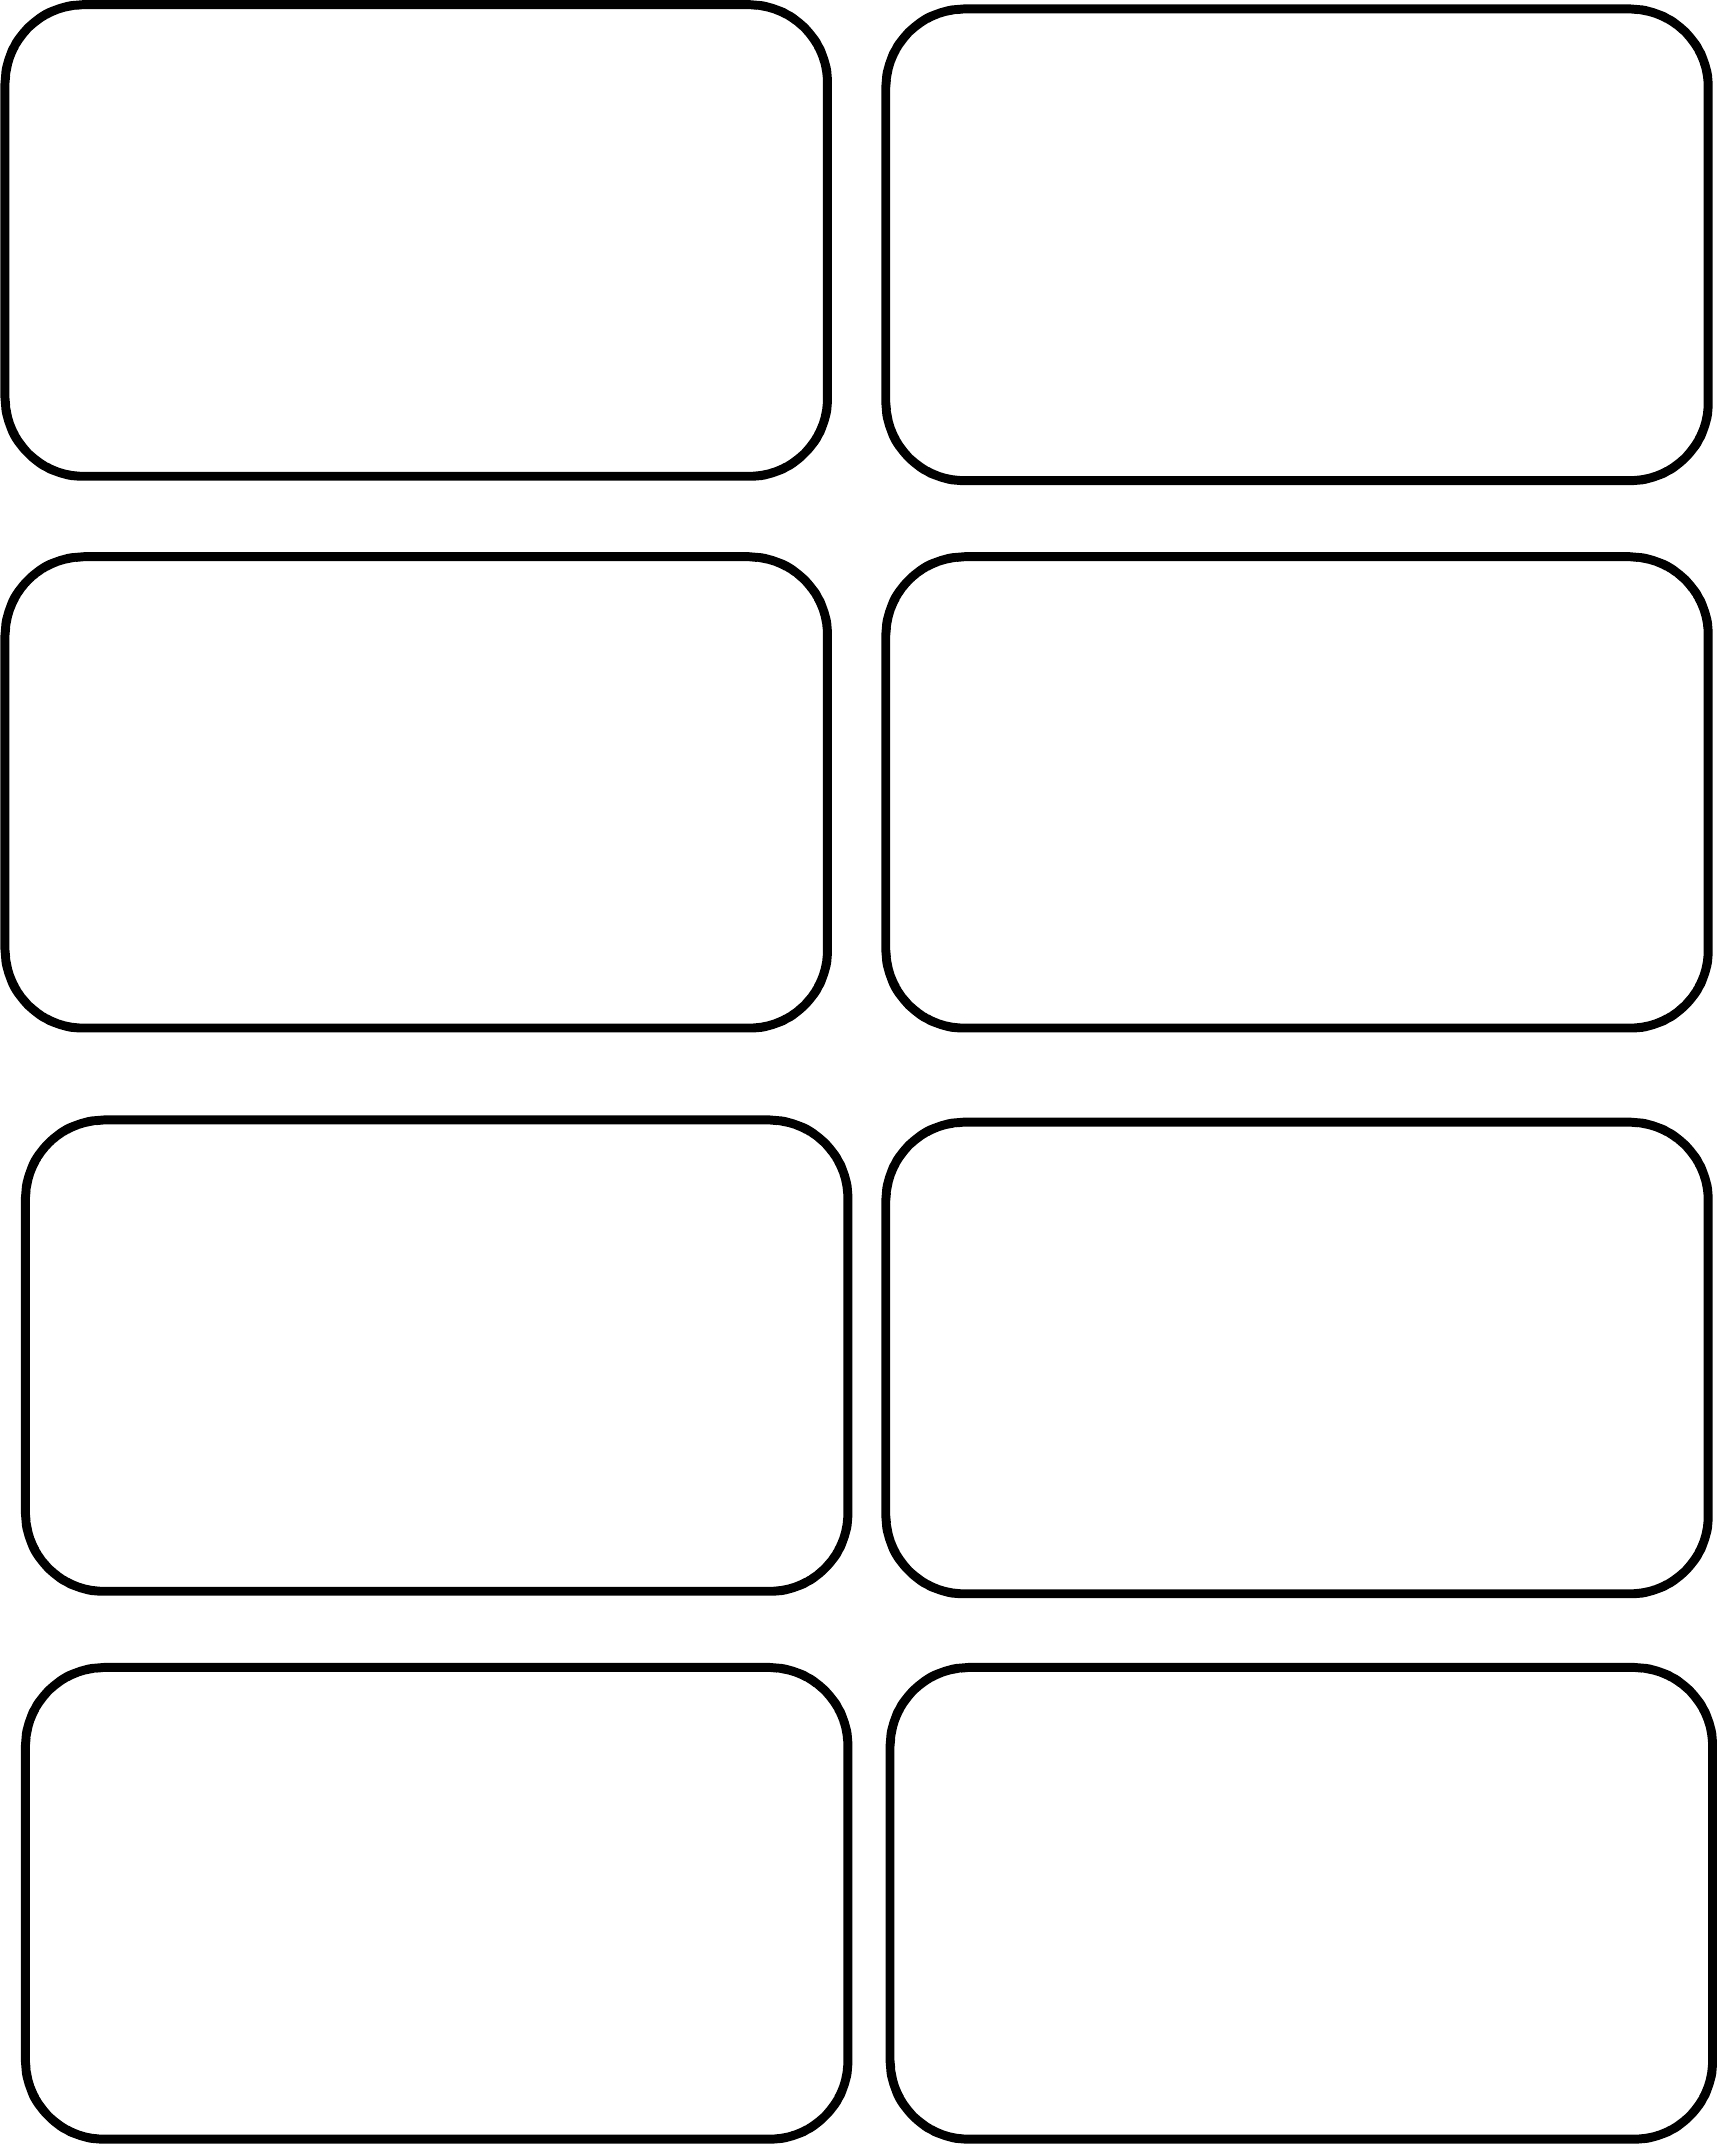 Template Of Luggage Tag Free Download For Blank Luggage Tag Template